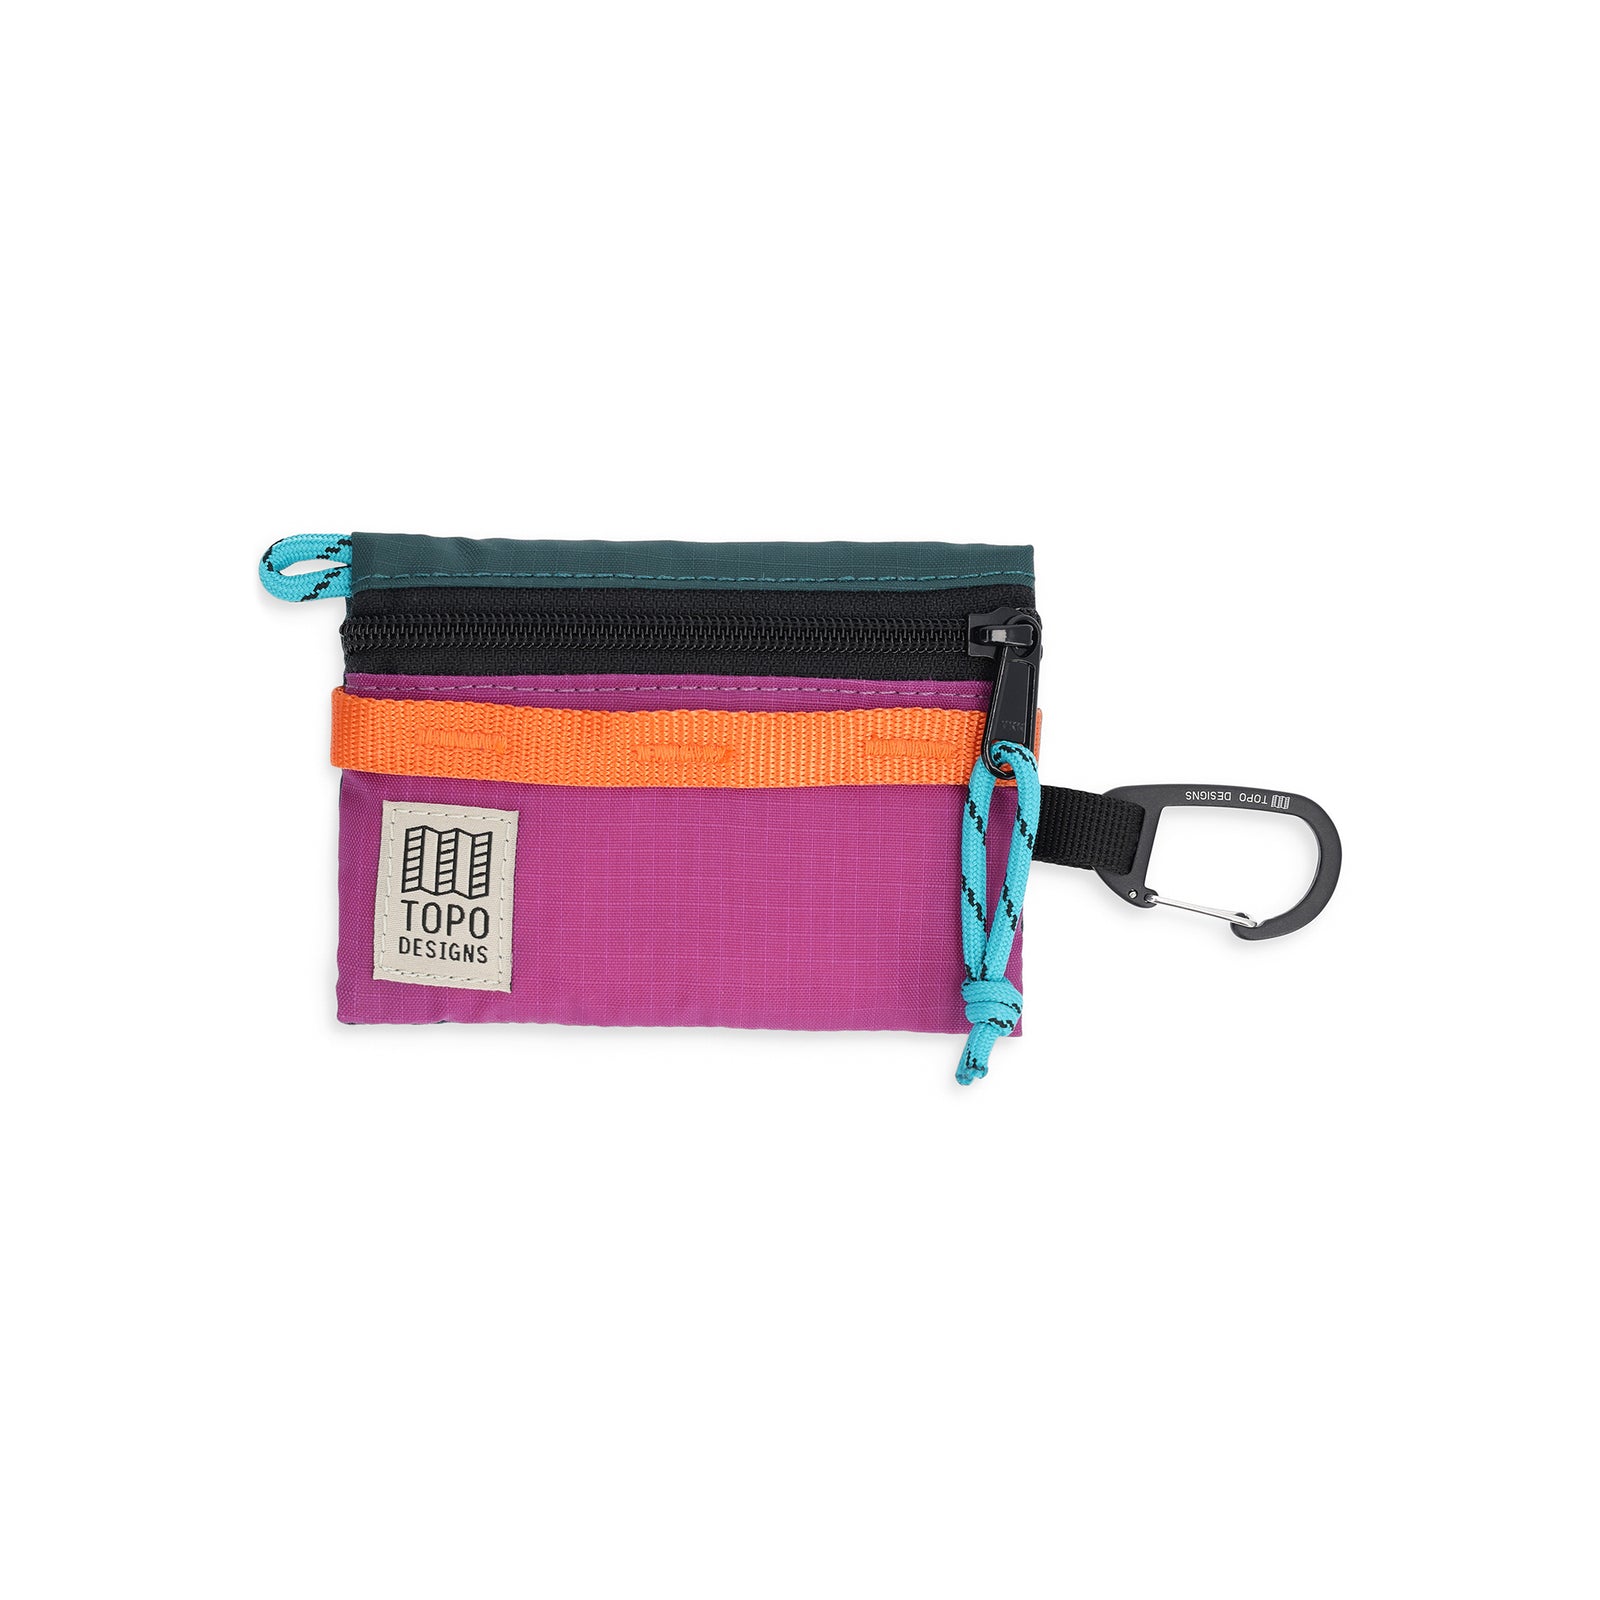 Topo Designs Mountain Accessory Bag carabiner clip pouch keychain wallet in "Botanic Green / Grape" lightweight recycled nylon.